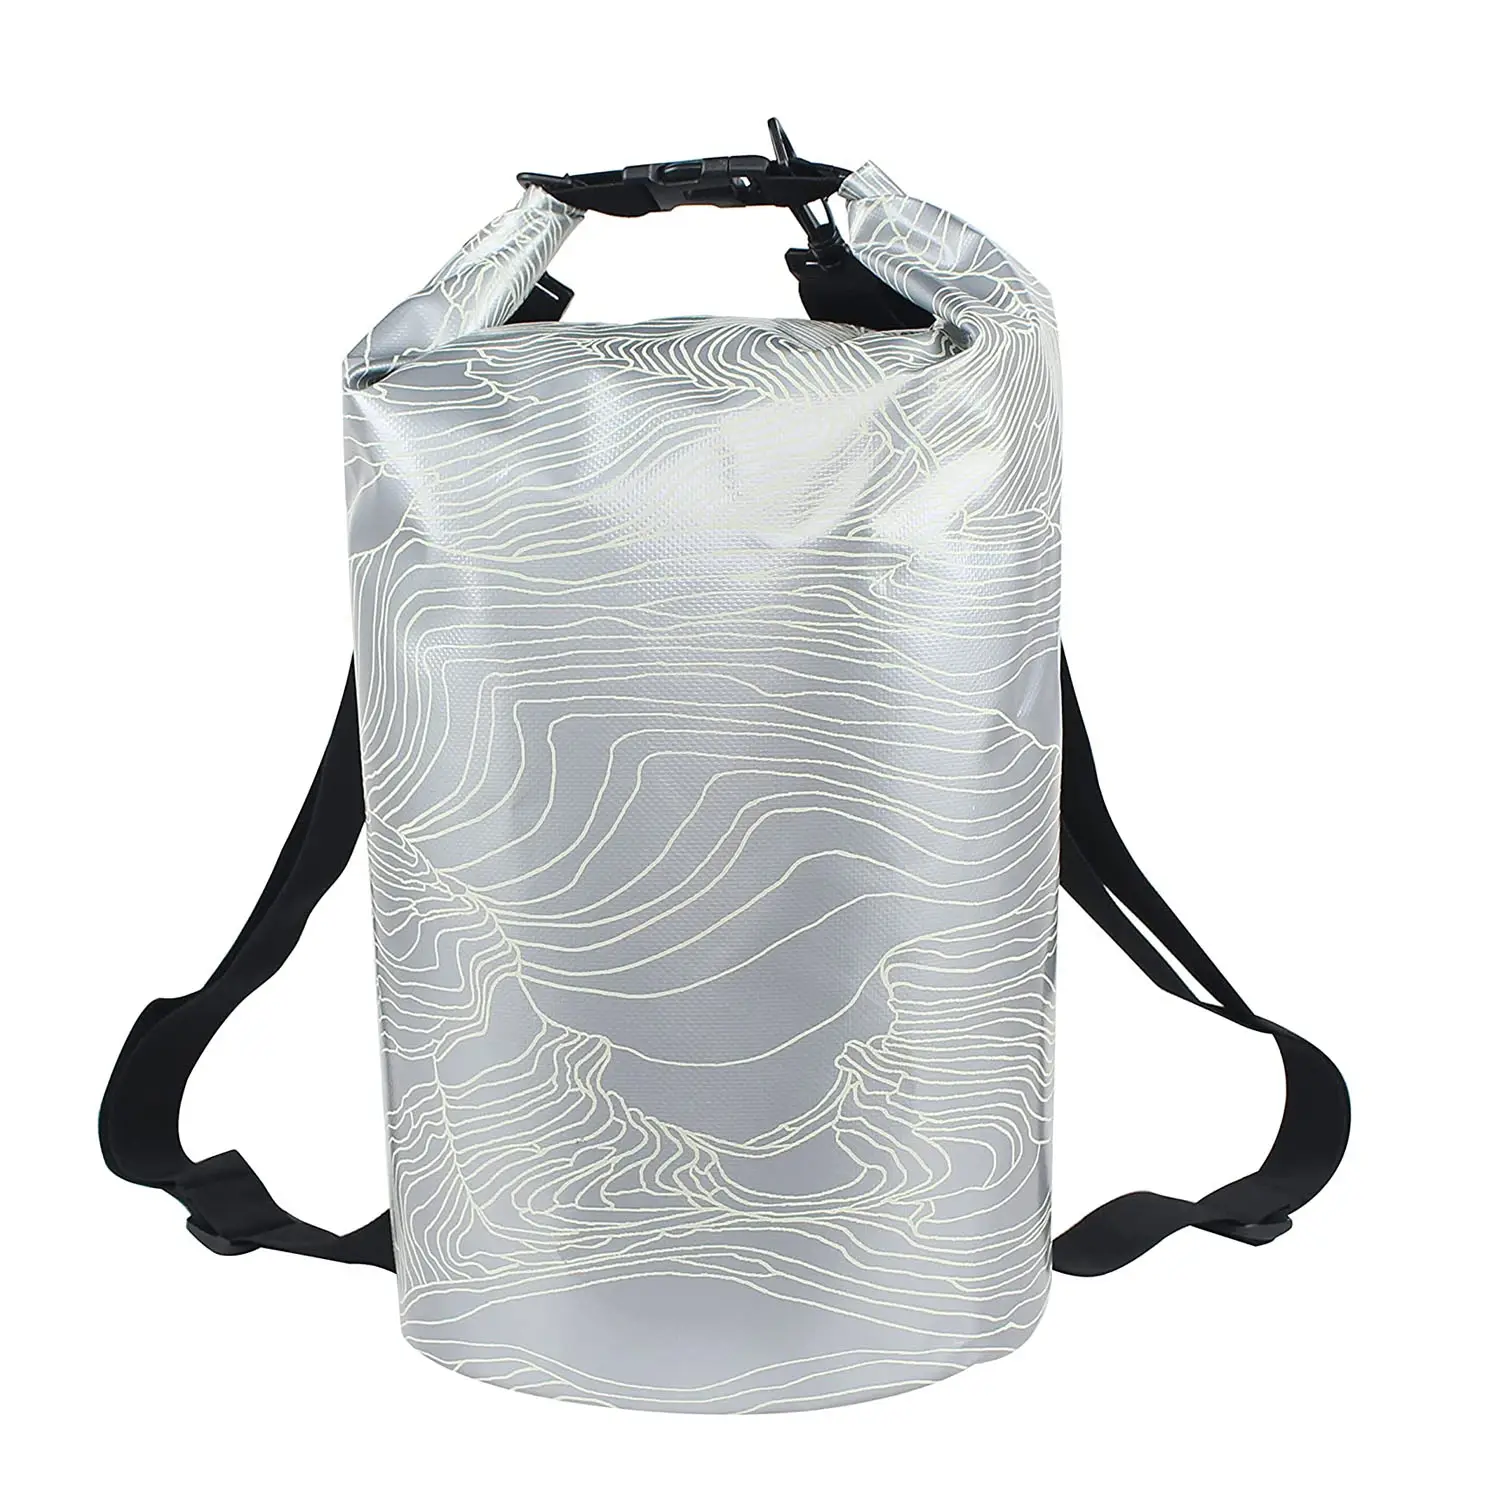 New Product 20L Waterproof Dry Bag Backpack Duffel Bag For Travel Motorcycling